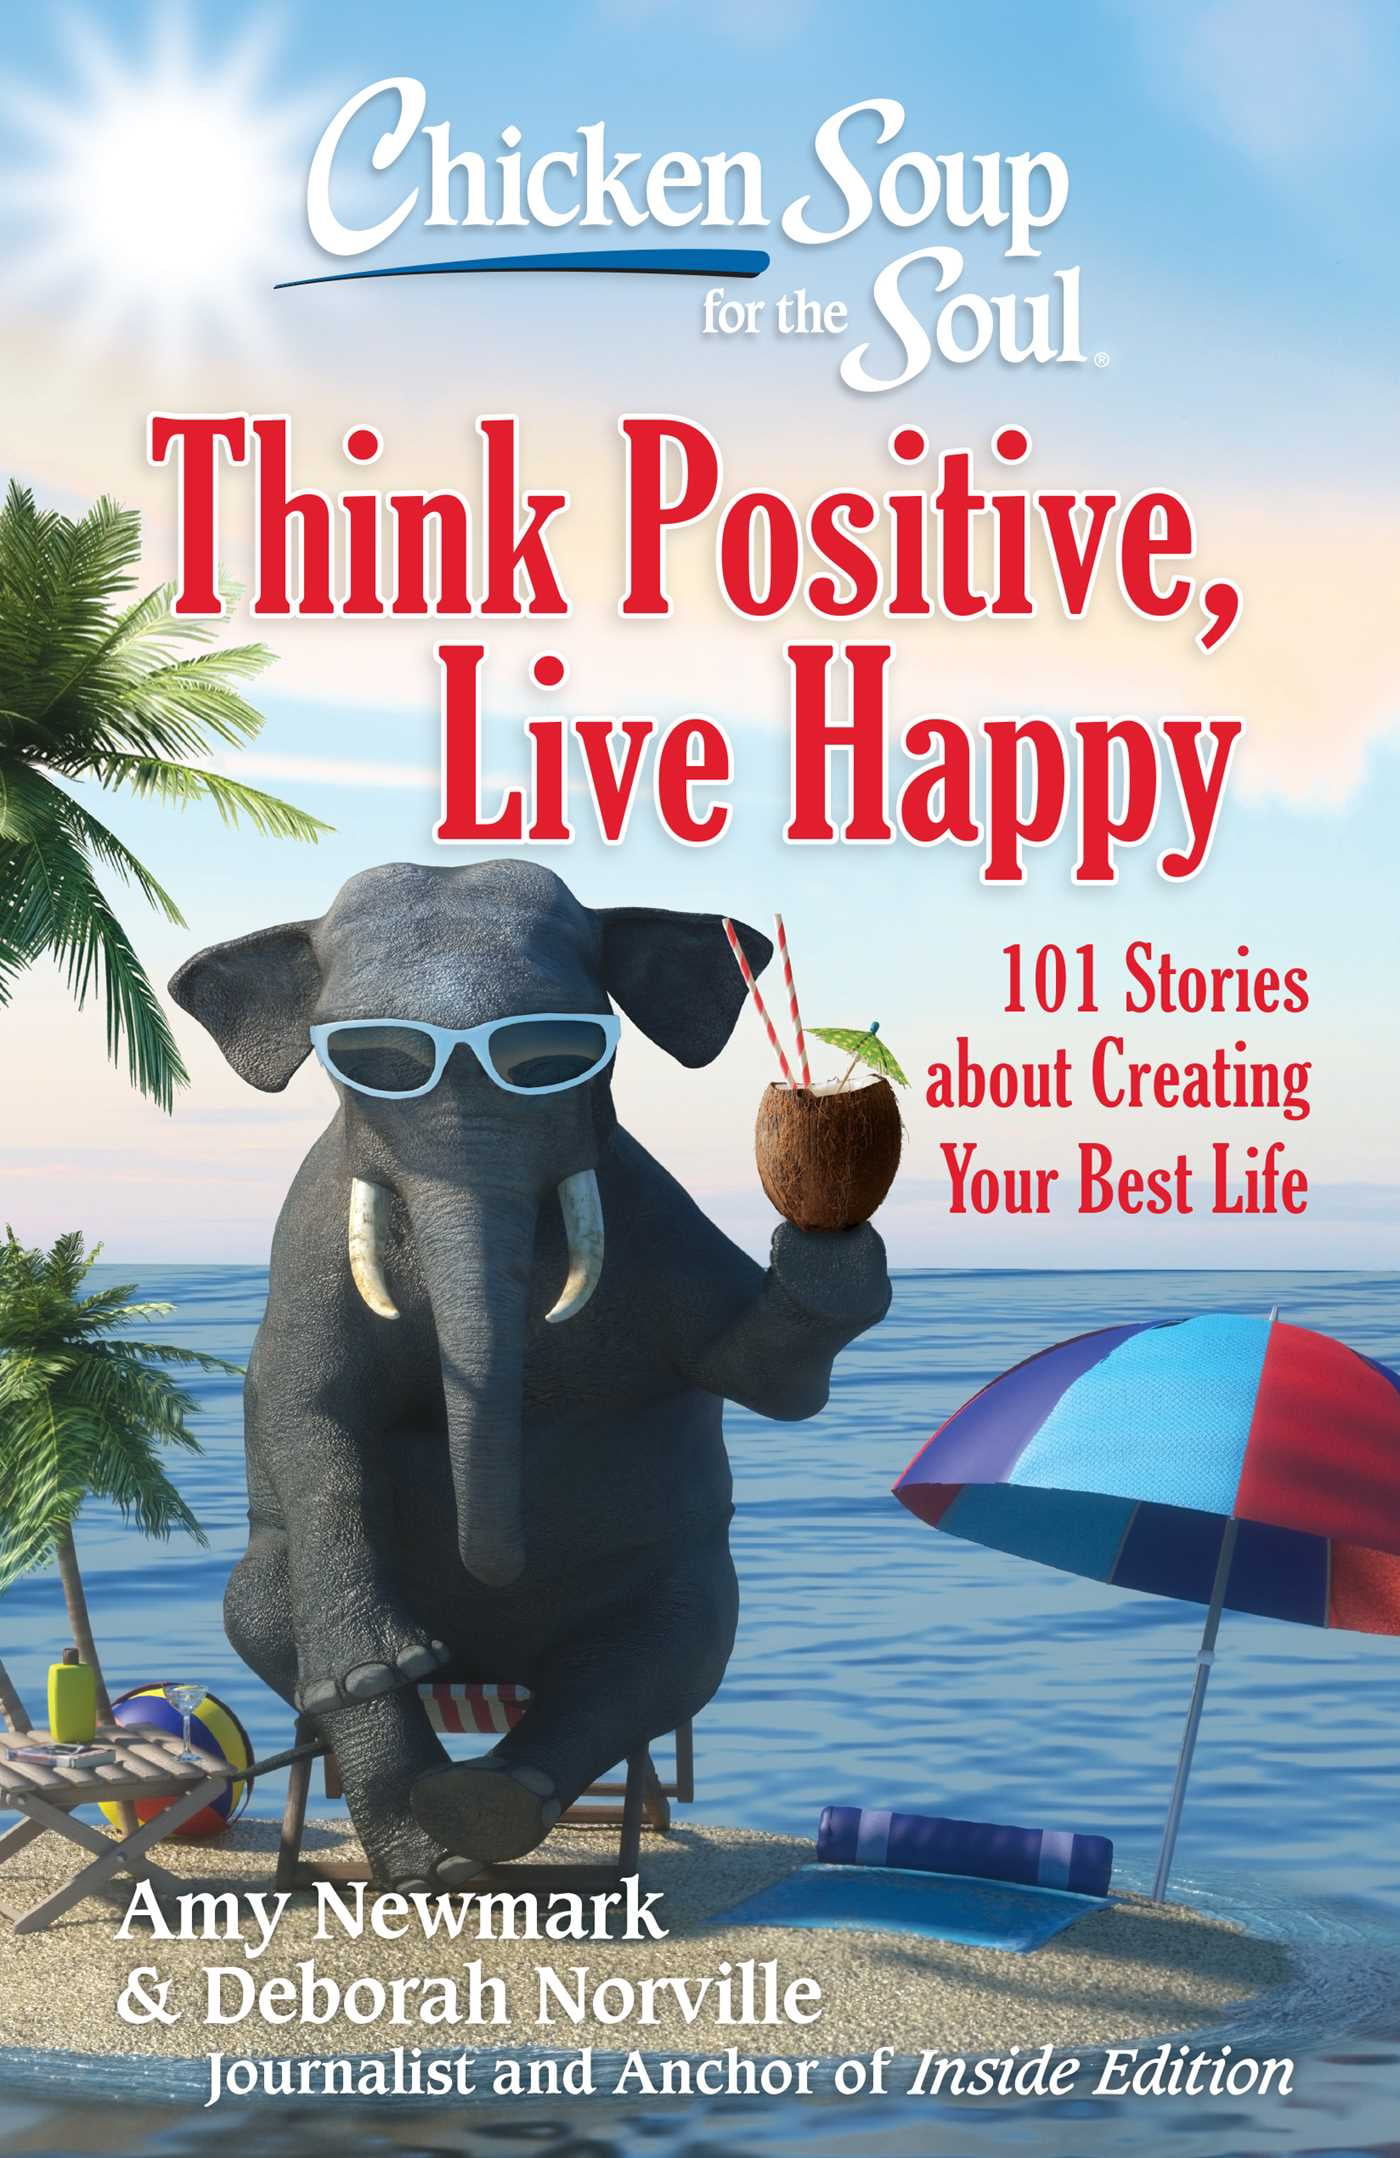 Chicken Soup for the Soul Think Positive, Live Happy 101 Stories